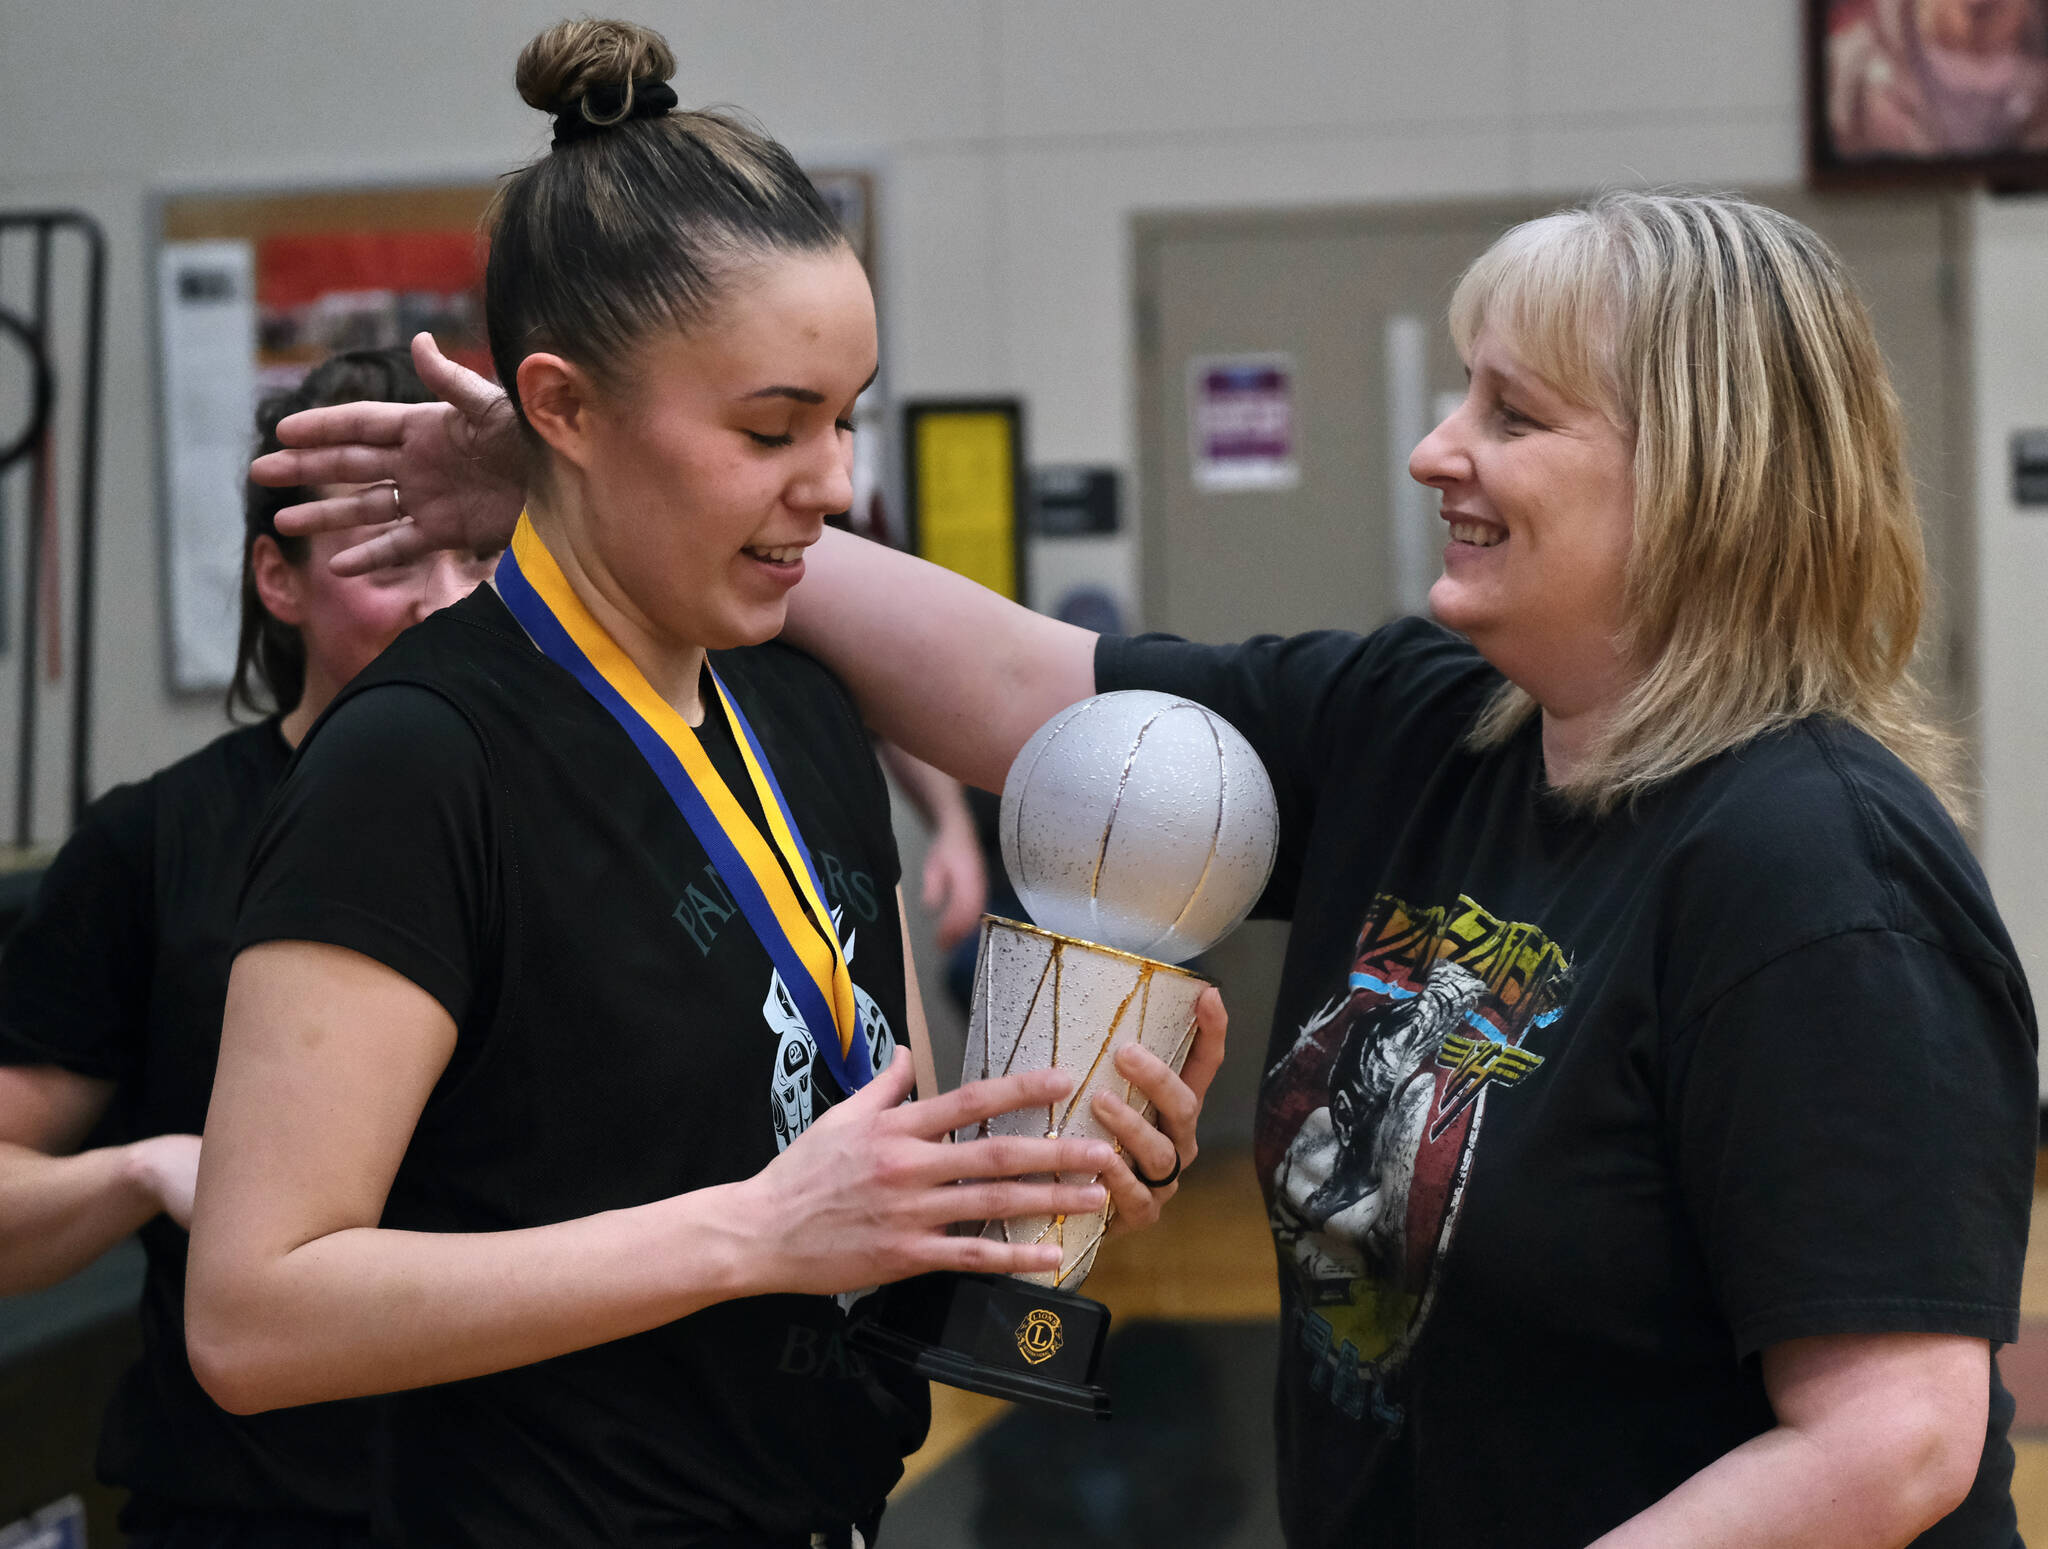 Cassie Williams is congratulated by her mother Ann after winning the Women’s Bracket championship and Most Valuable Player honors, Saturday, March 25, during the Gold Medal Basketball Tournament at Juneau-Douglas High School: Yadaa.at Kalé. (Klas Stolpe/For the Juneau Empire)